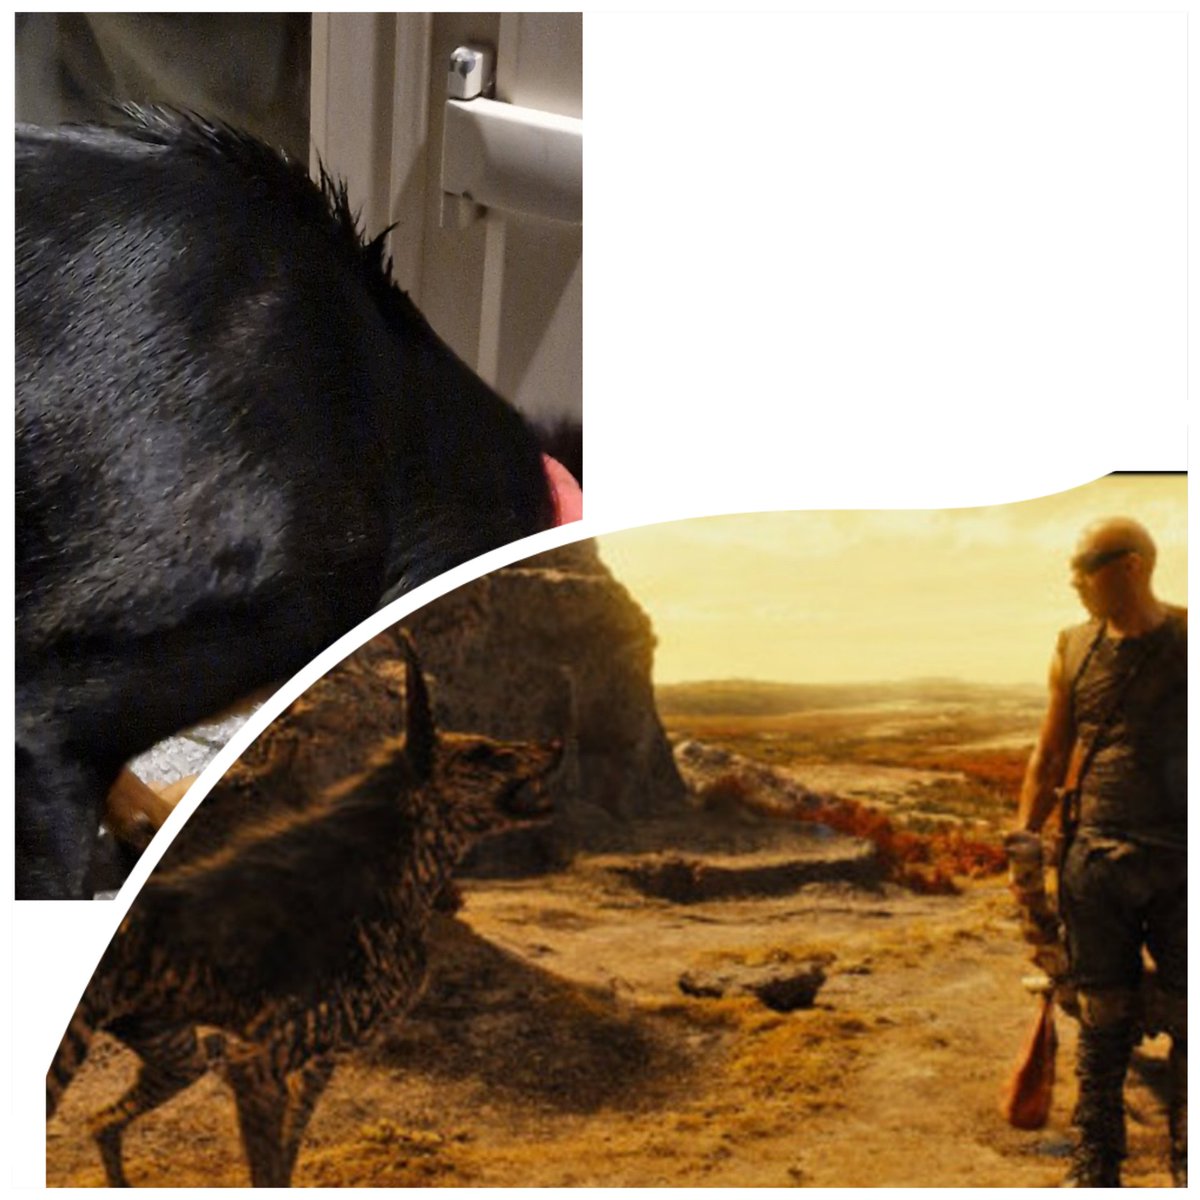 My dog already resembles a jackal, but the way her spot-on treatment makes her back fur stick up reminds me of Riddick's alien-jackal 😂😂 If you know, you know #Riddick #Dogs #Dogsoftwitter #AustralianKelpie